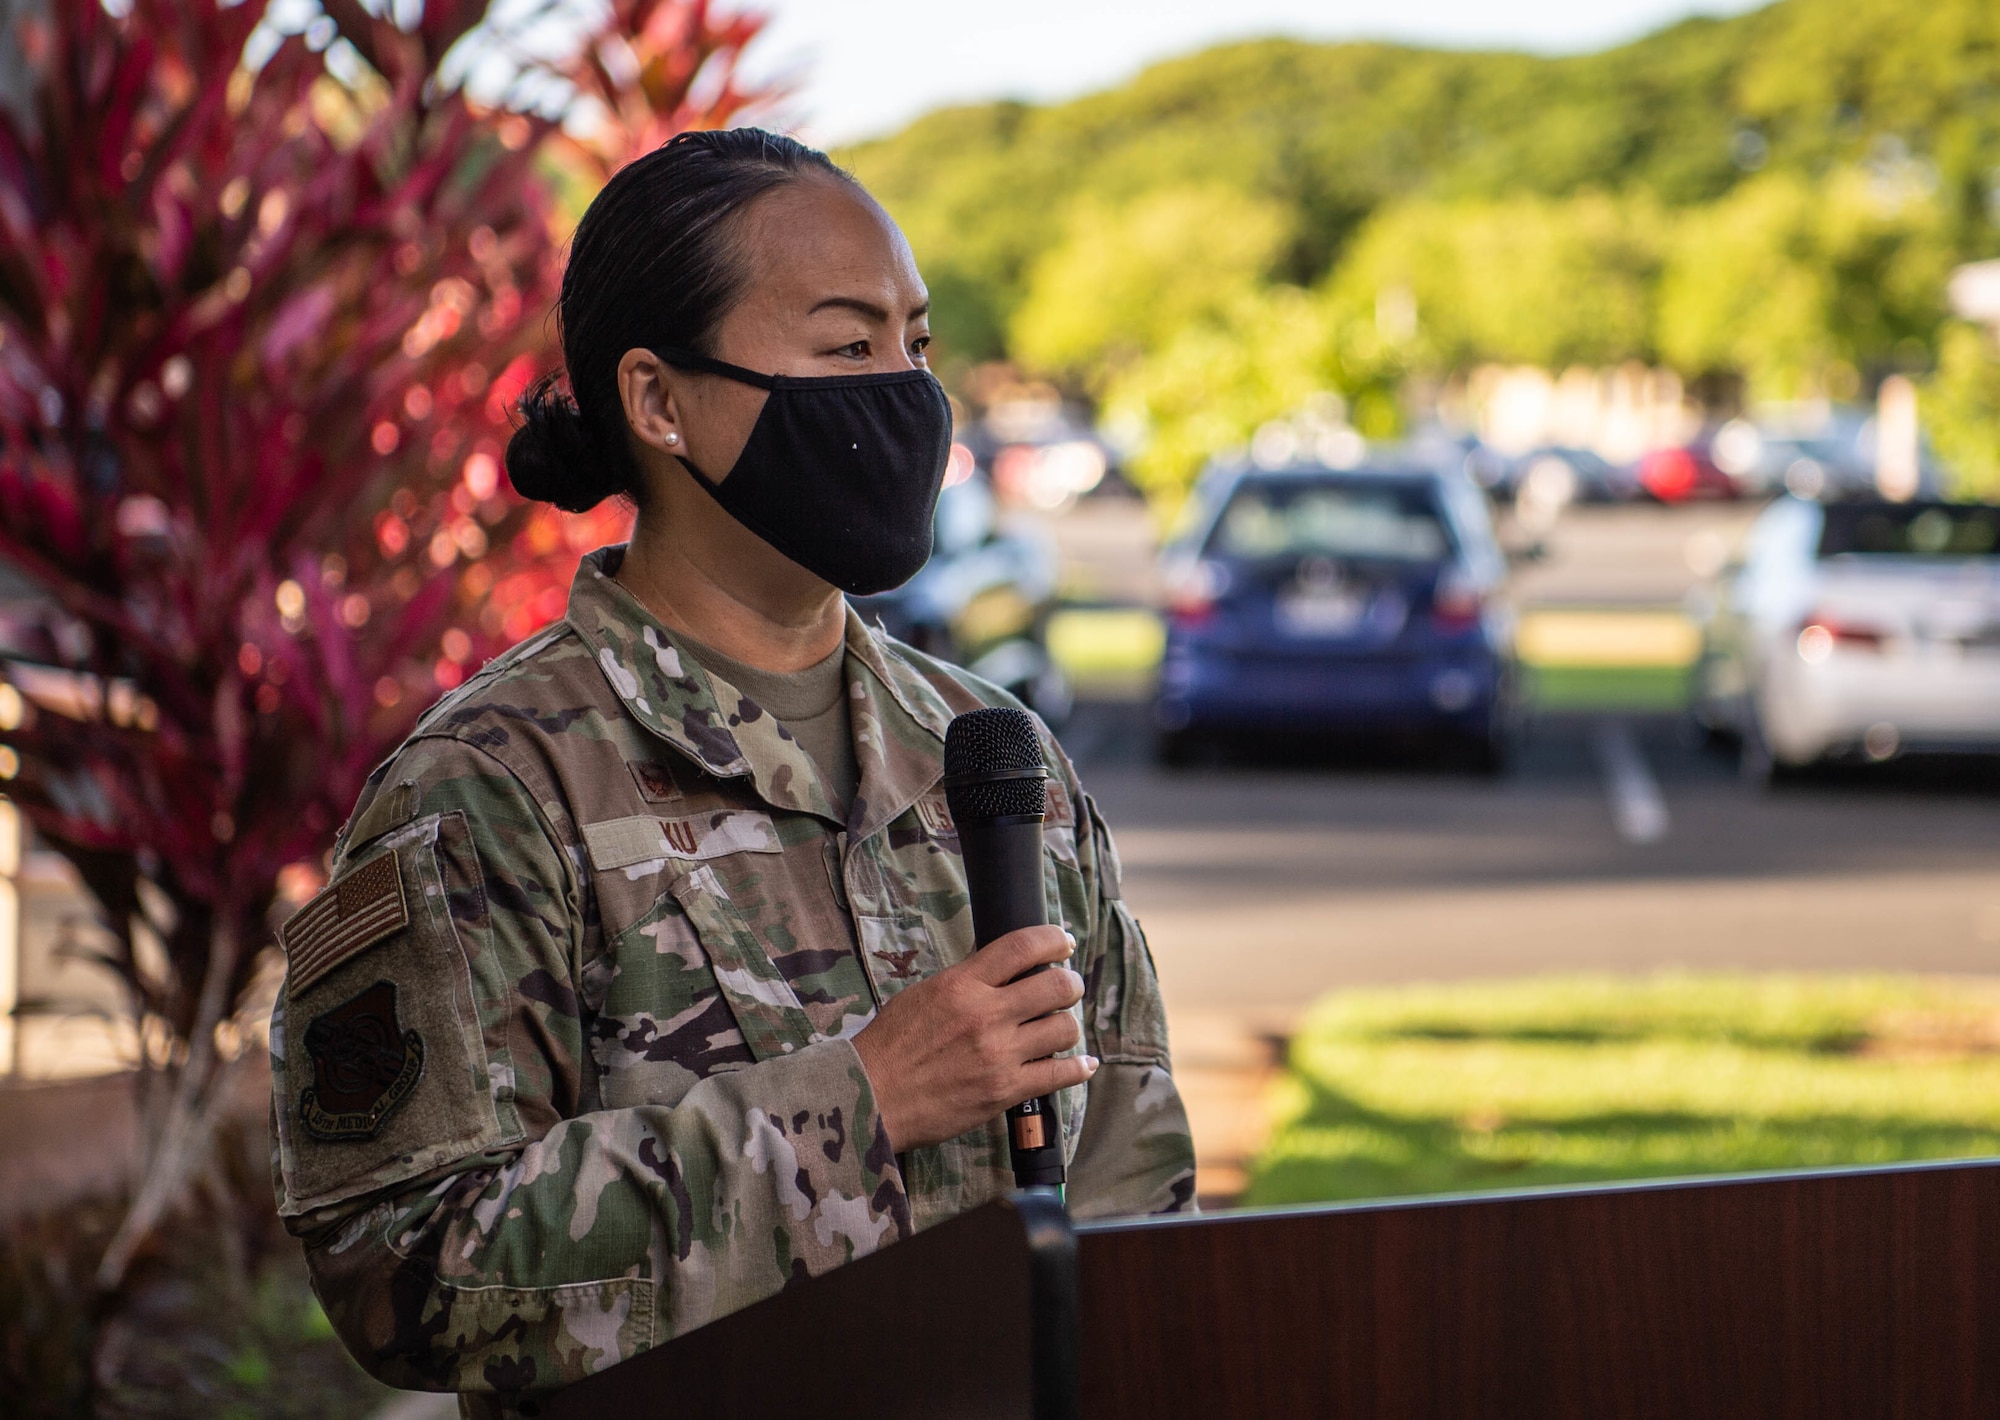 Col. Stephanie Ku, 15th Medical Group commander, gives a speech during the Military Health System Genesis launch ceremony at Joint Base Pearl Harbor-Hickam, Hawaii, Sept. 25, 2021. MHS Genesis is a $11 billion electronic health record system that provides enhanced and secure technology to manage health information. (U.S. Air Force photo by Senior Airman Alan Ricker)